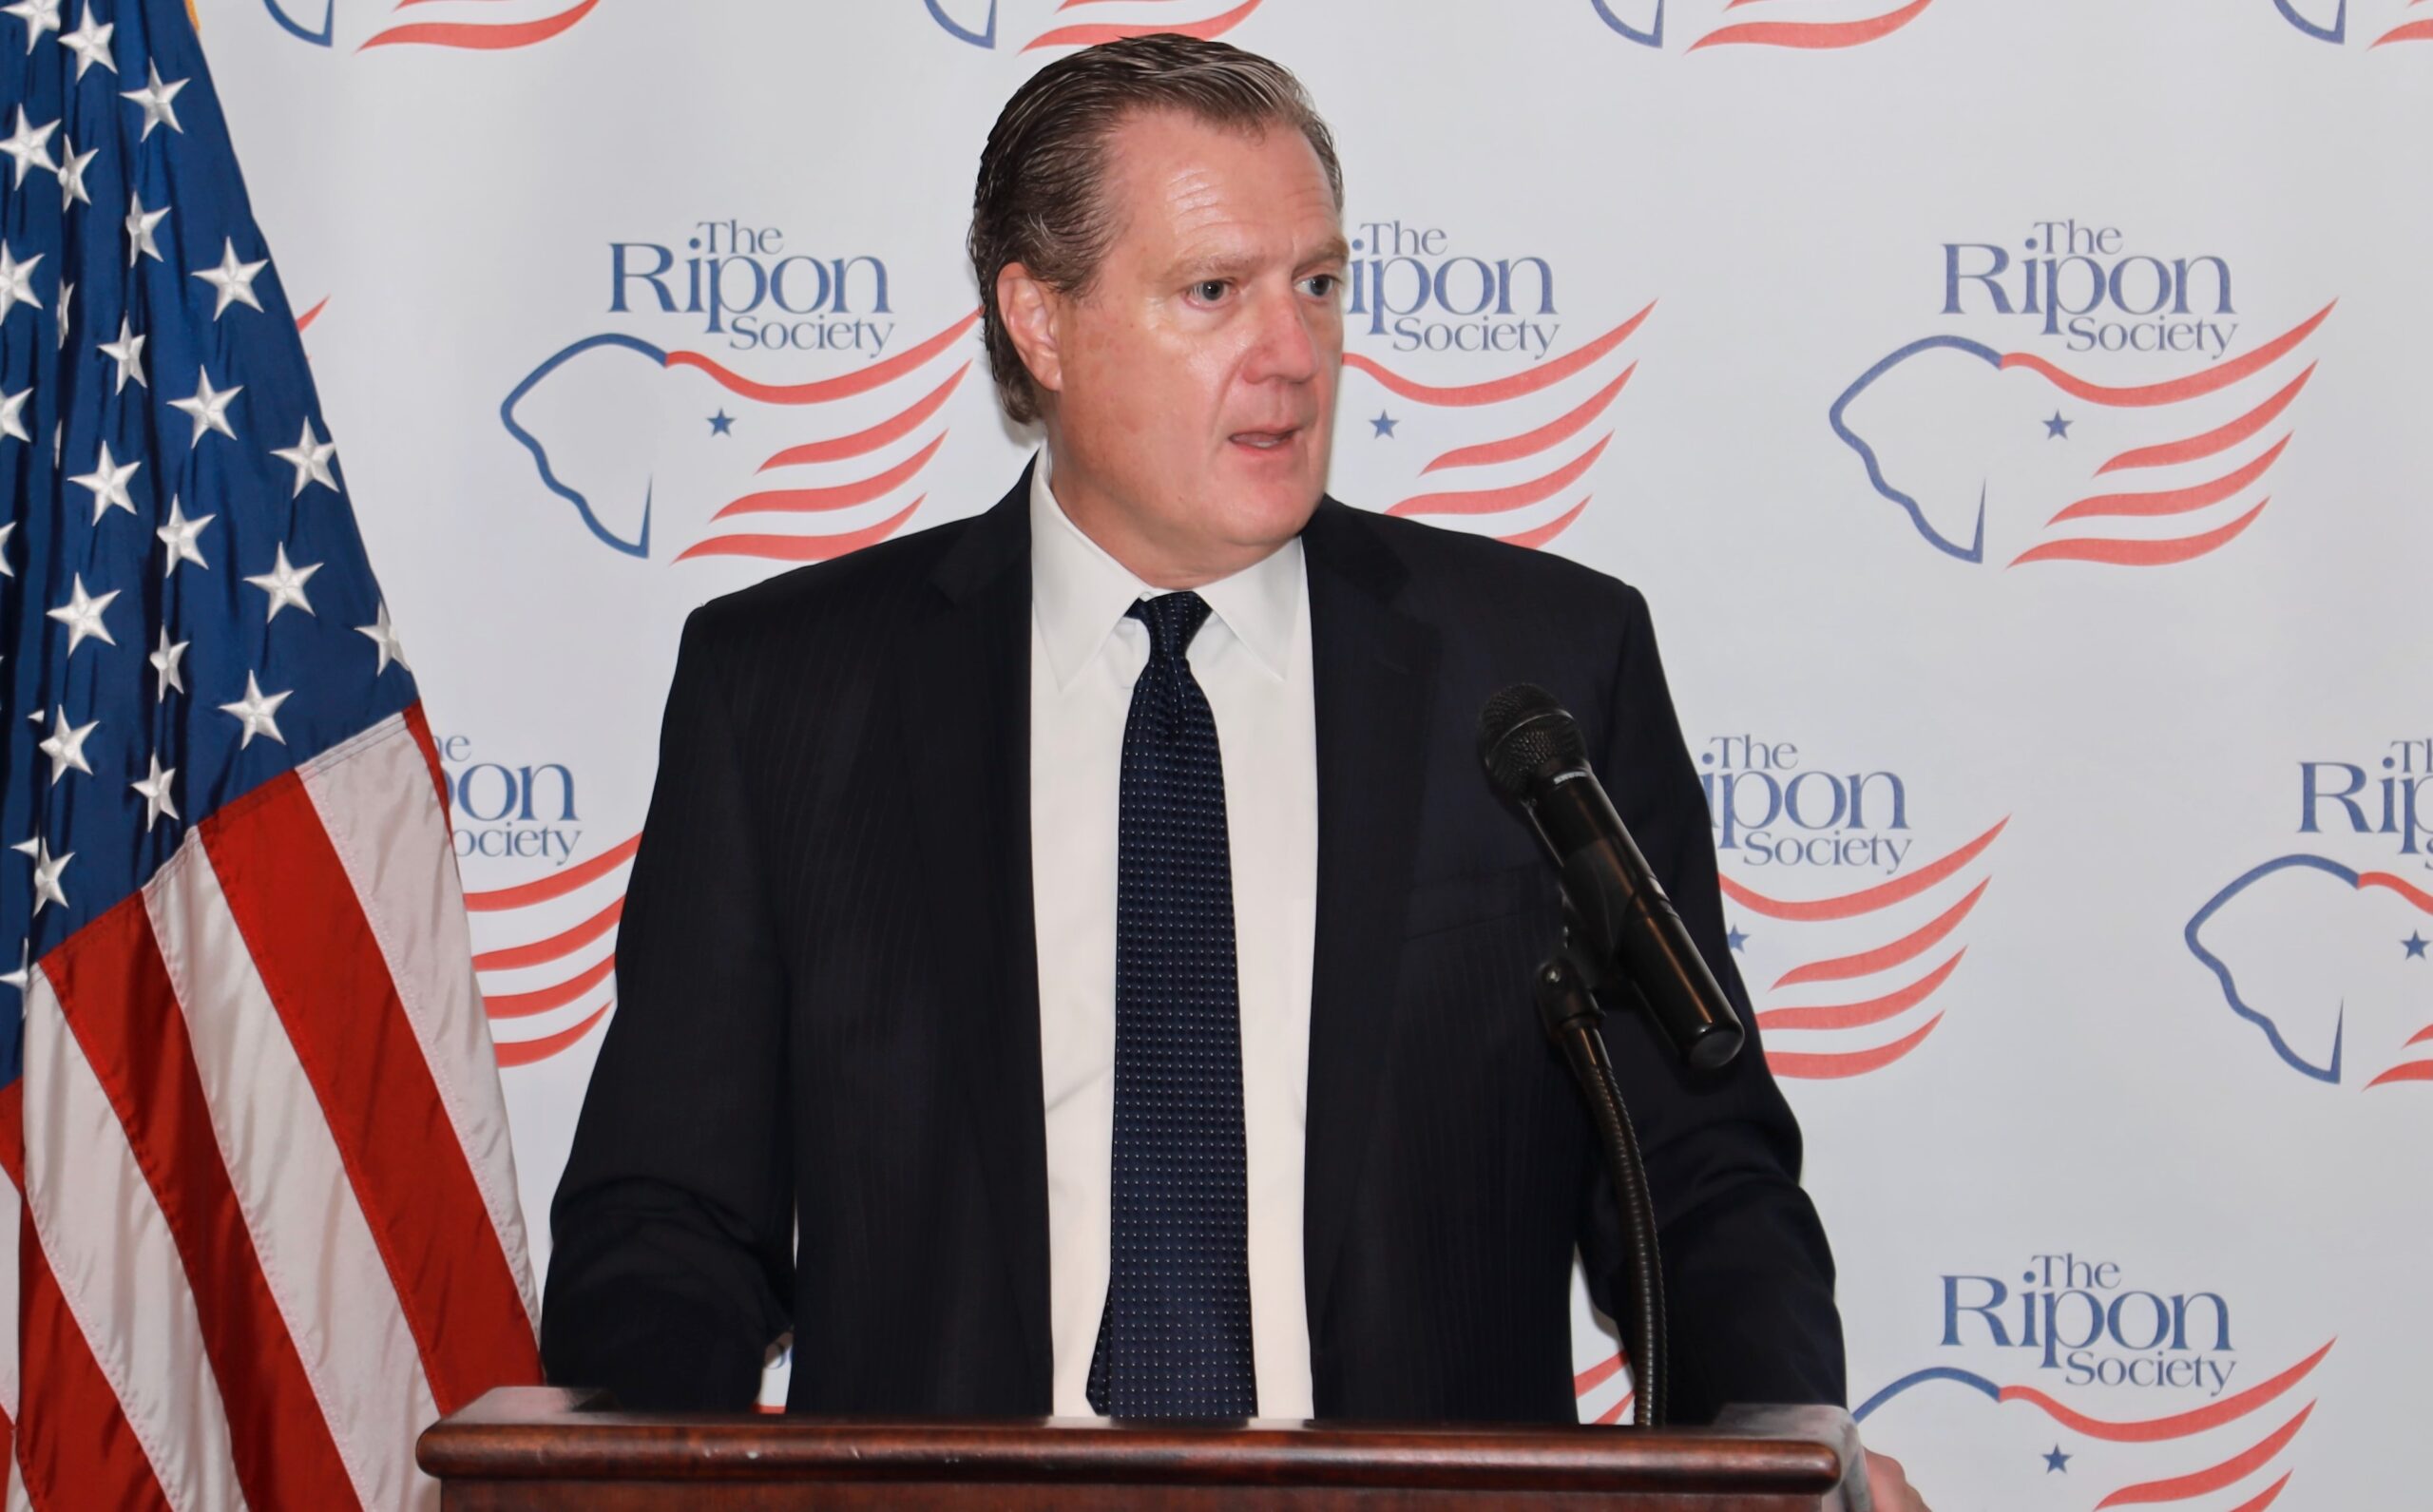 Chairman Mike Turner Brings Bipartisan Approach to National Security